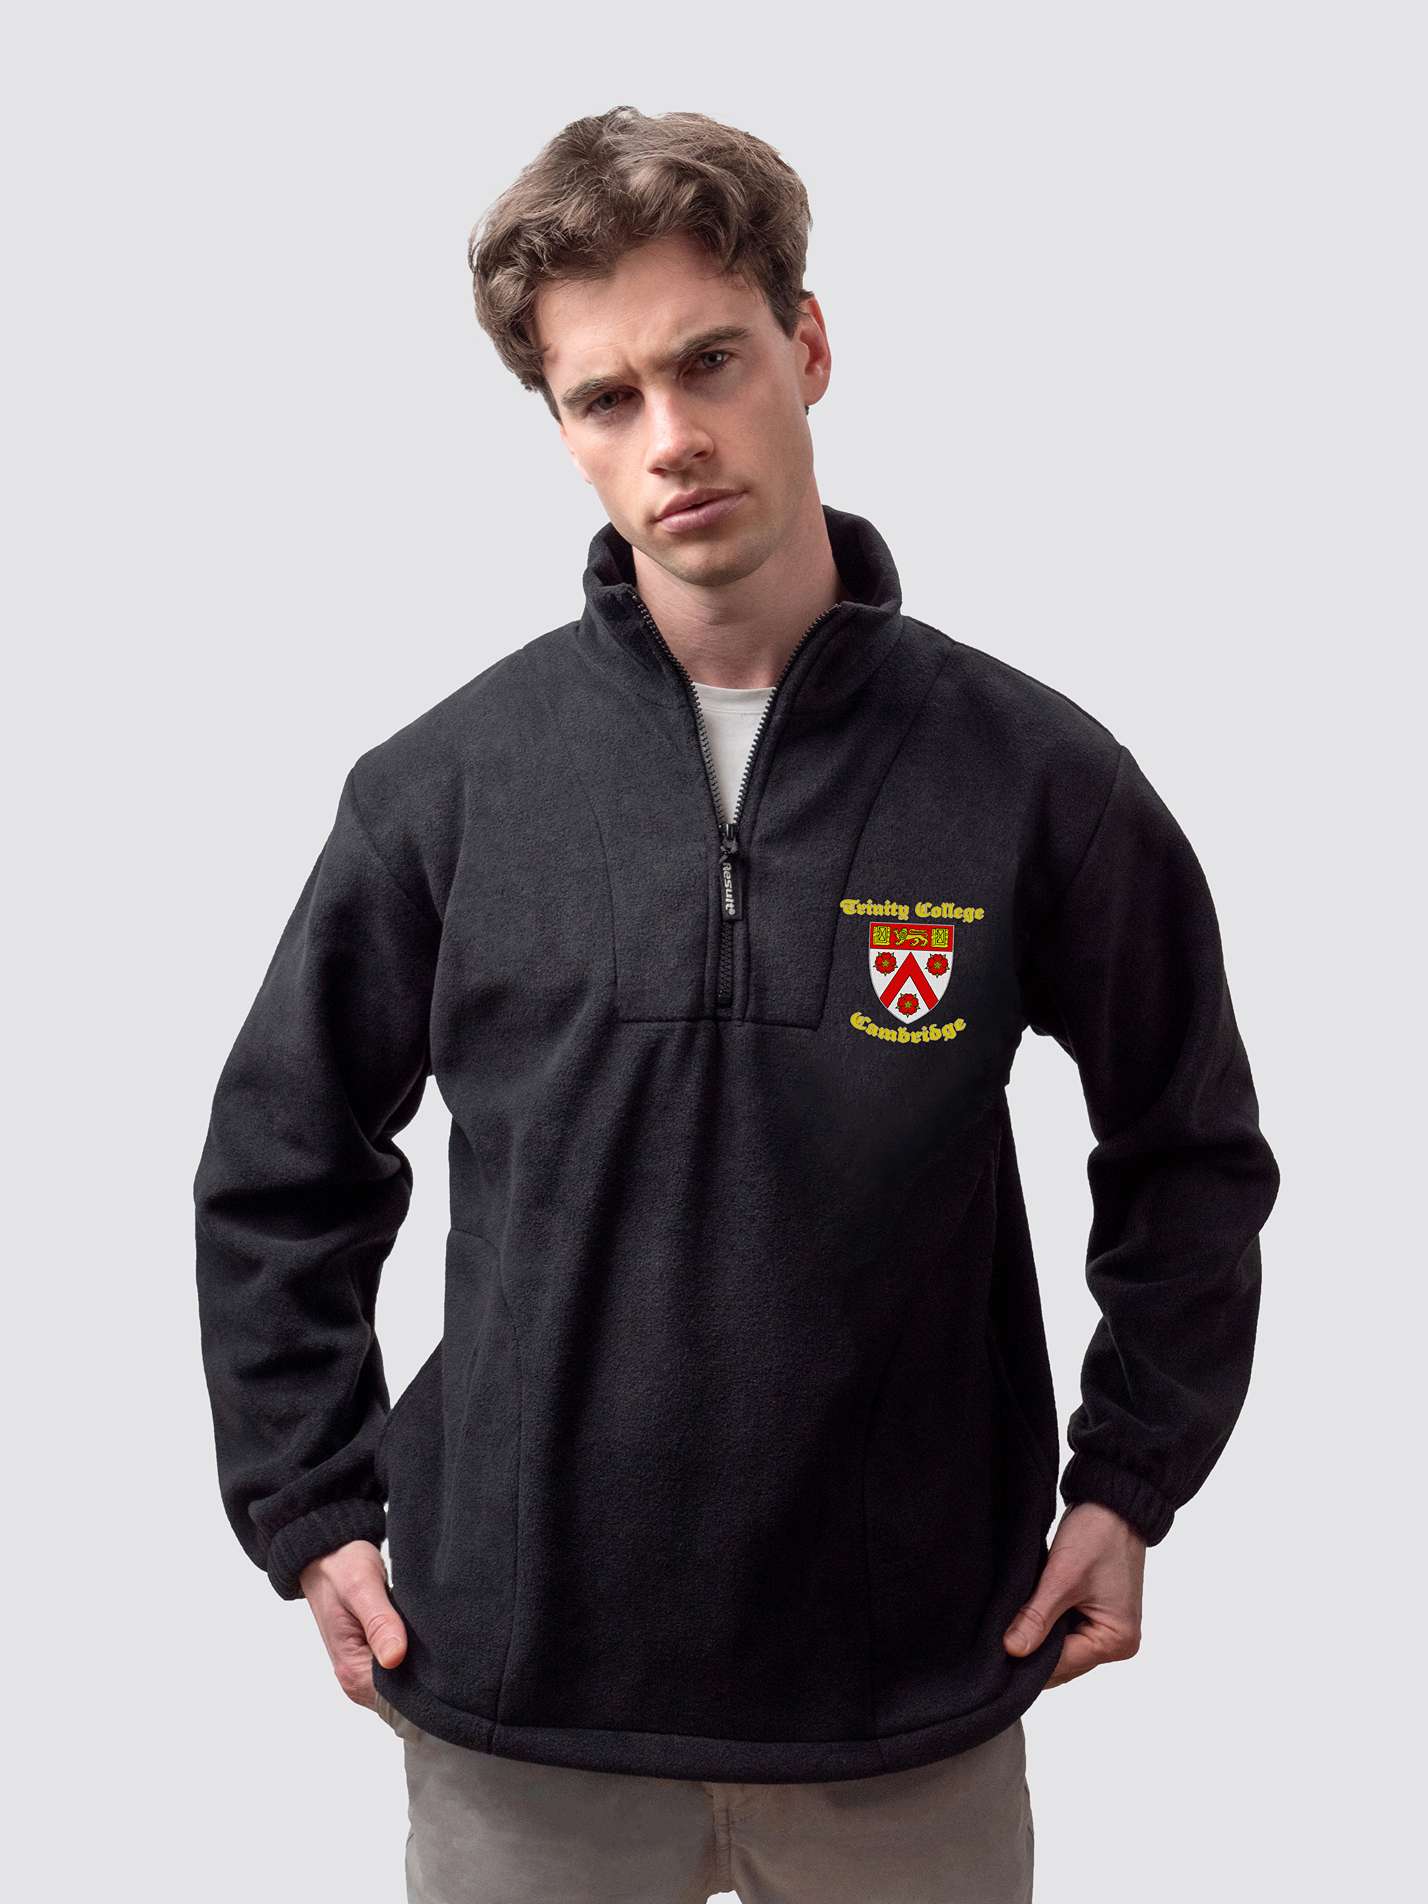 Cambridge university fleece, with custom embroidered initials and Trinity crest